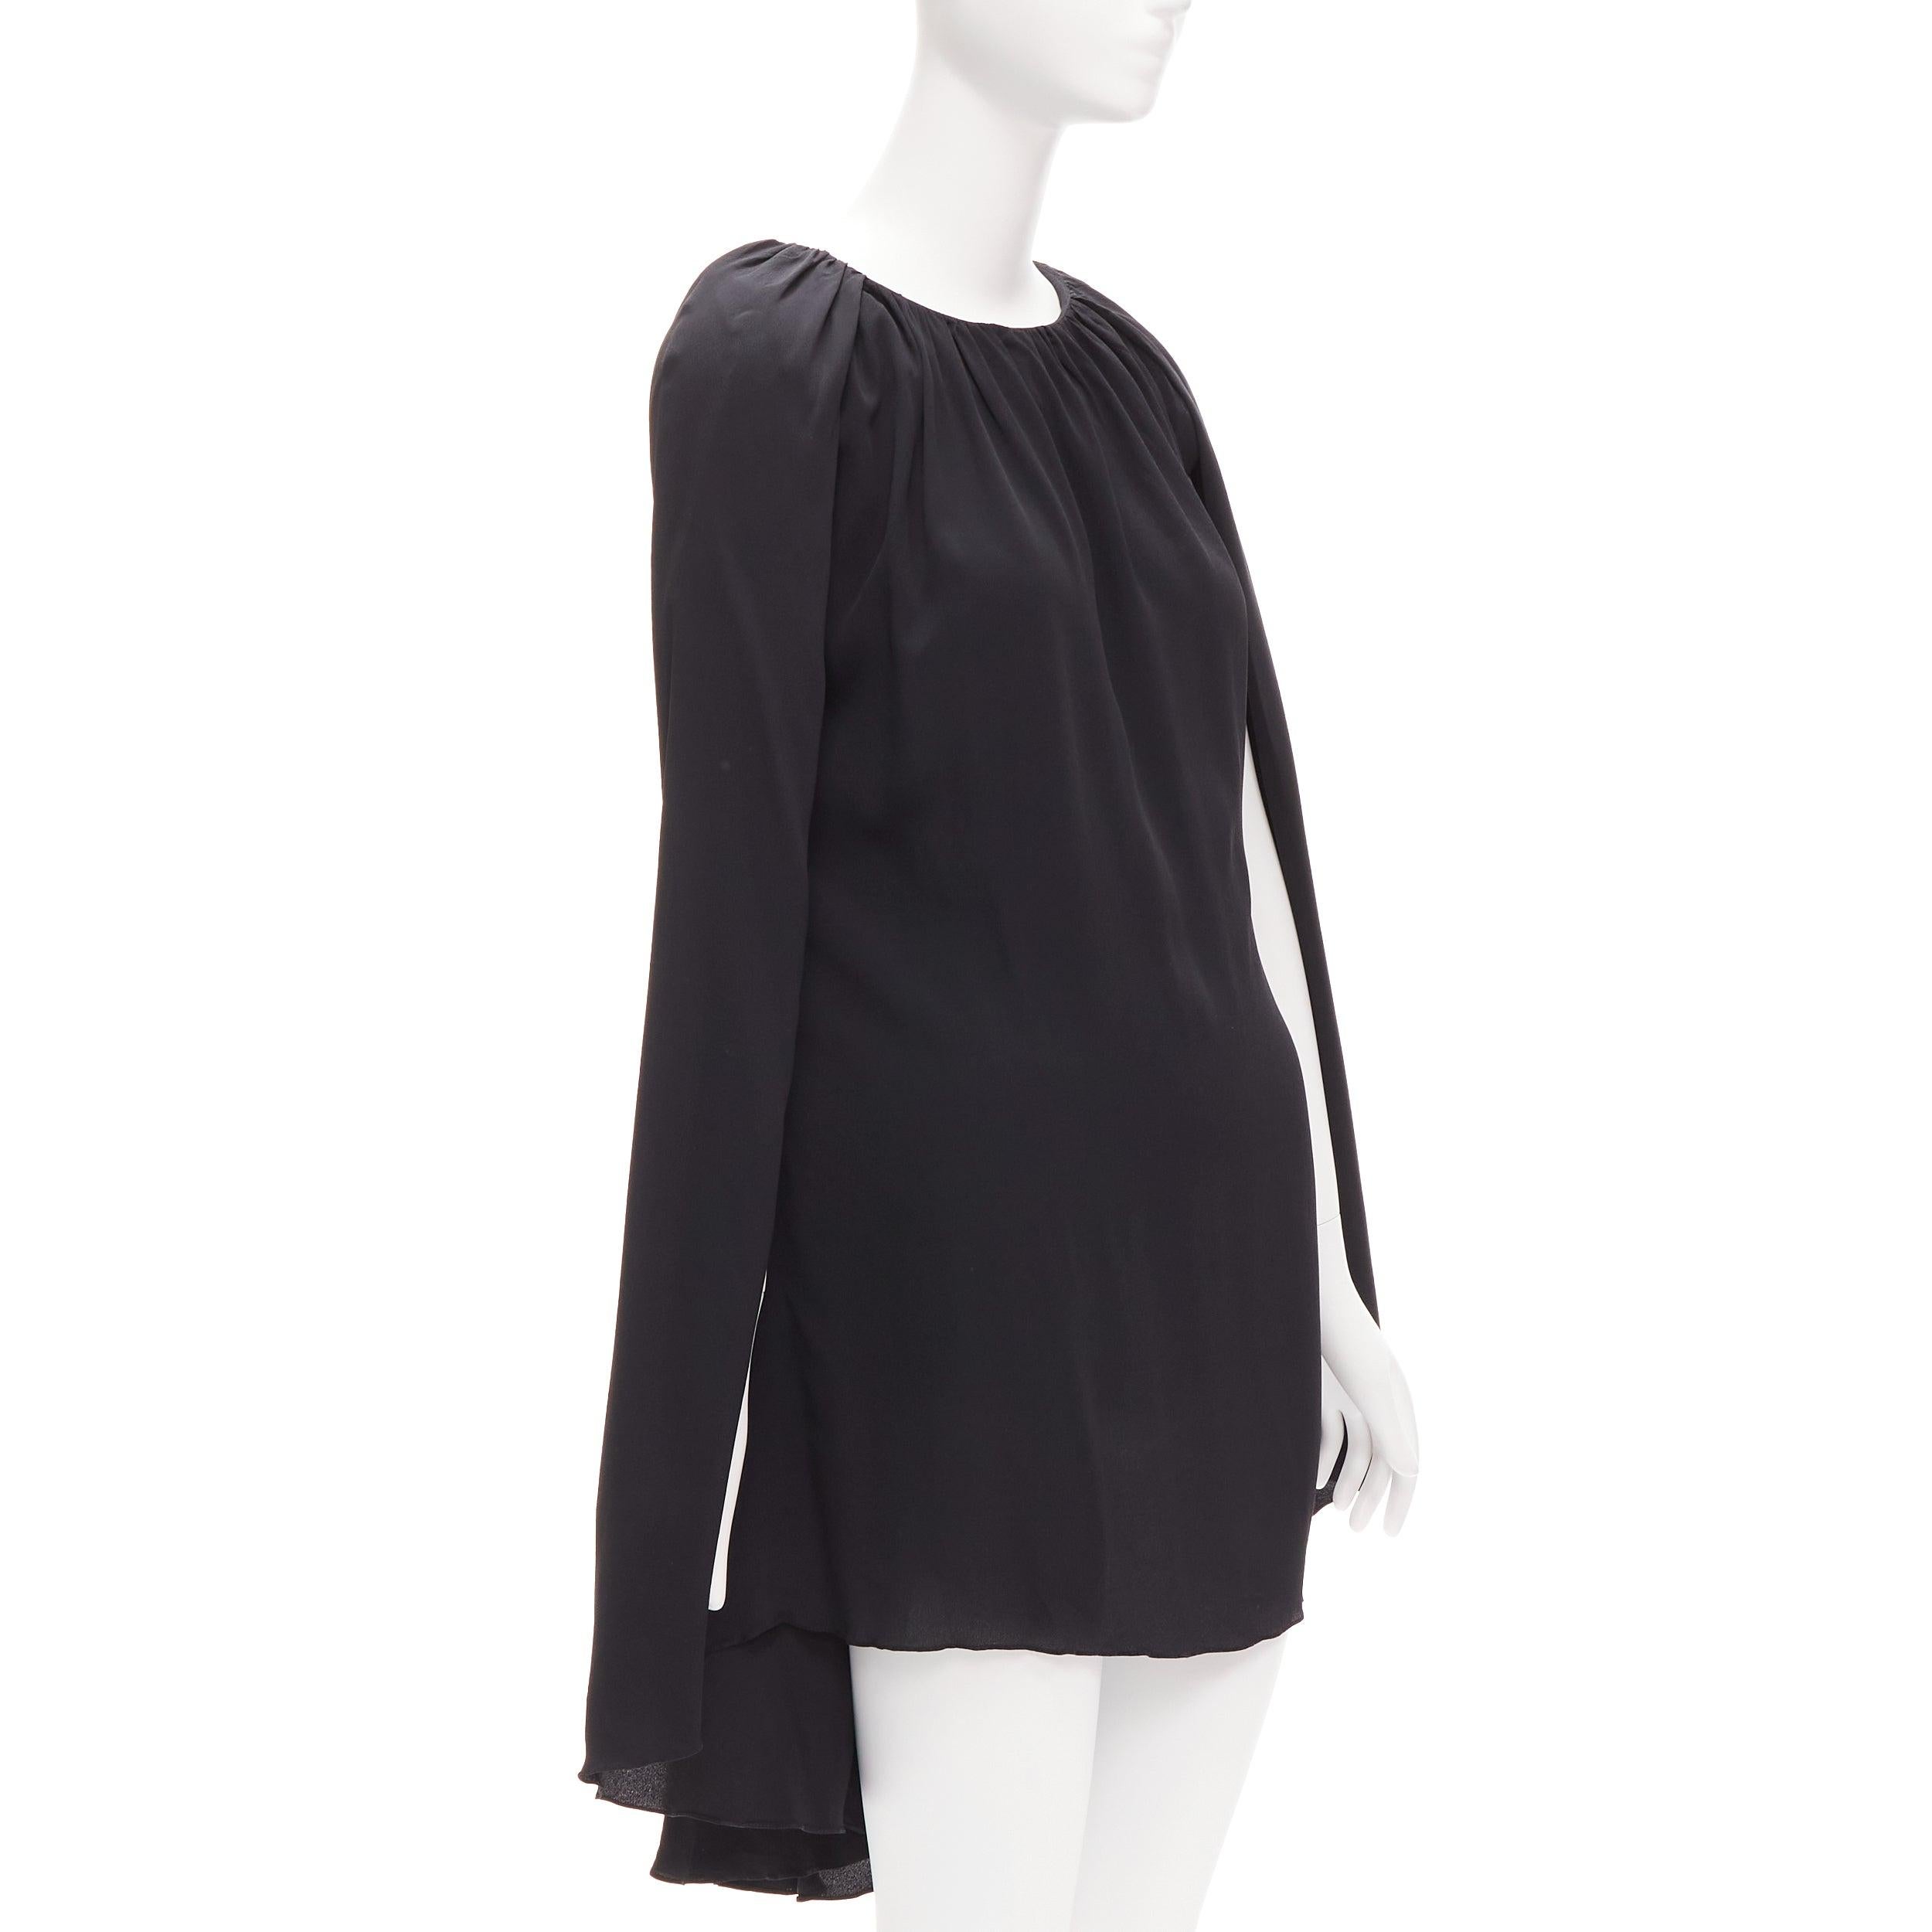 MARNI black acetate silk cape sleeve crew neck mini dress IT40 S
Reference: CELG/A00297
Brand: Marni
Material: Acetate, Silk
Color: Black
Pattern: Solid
Closure: Slip On
Made in: Italy

CONDITION:
Condition: Excellent, this item was pre-owned and is